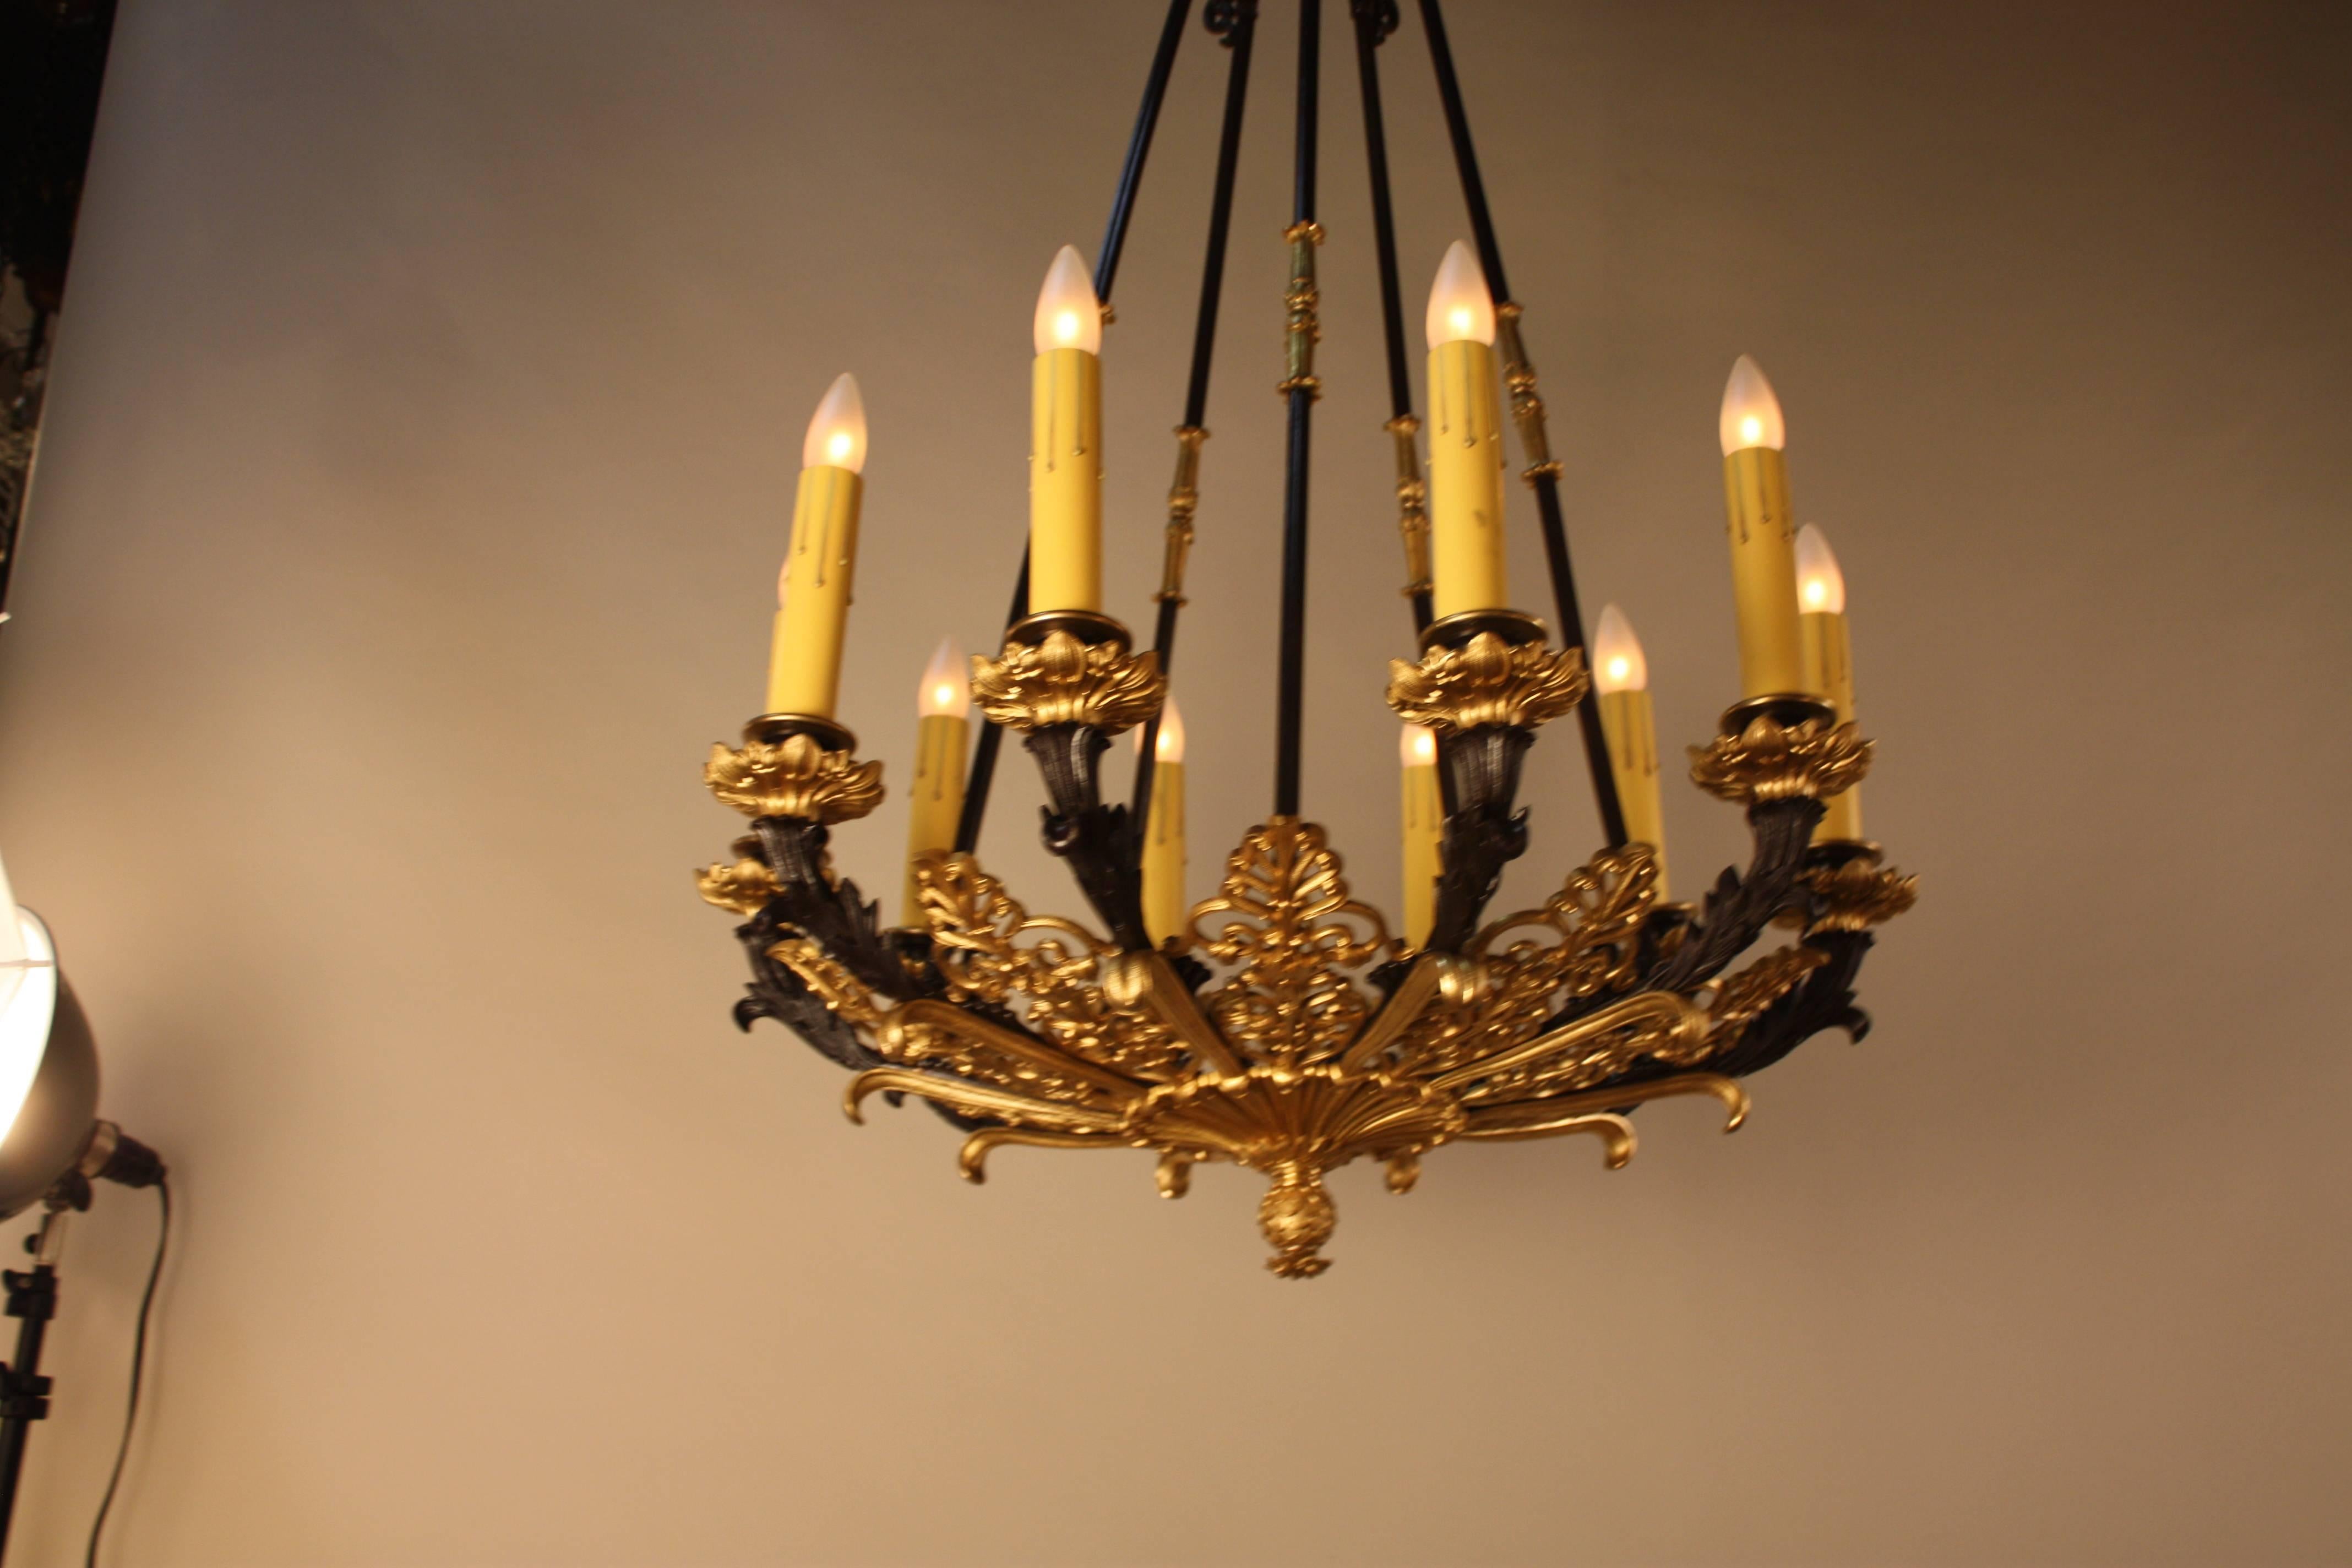 French 19th century in two color bronze Empire style chandelier.
This chandelier has total of ten lights with 60 watts max each light.
This chandelier has two canopies 37.5